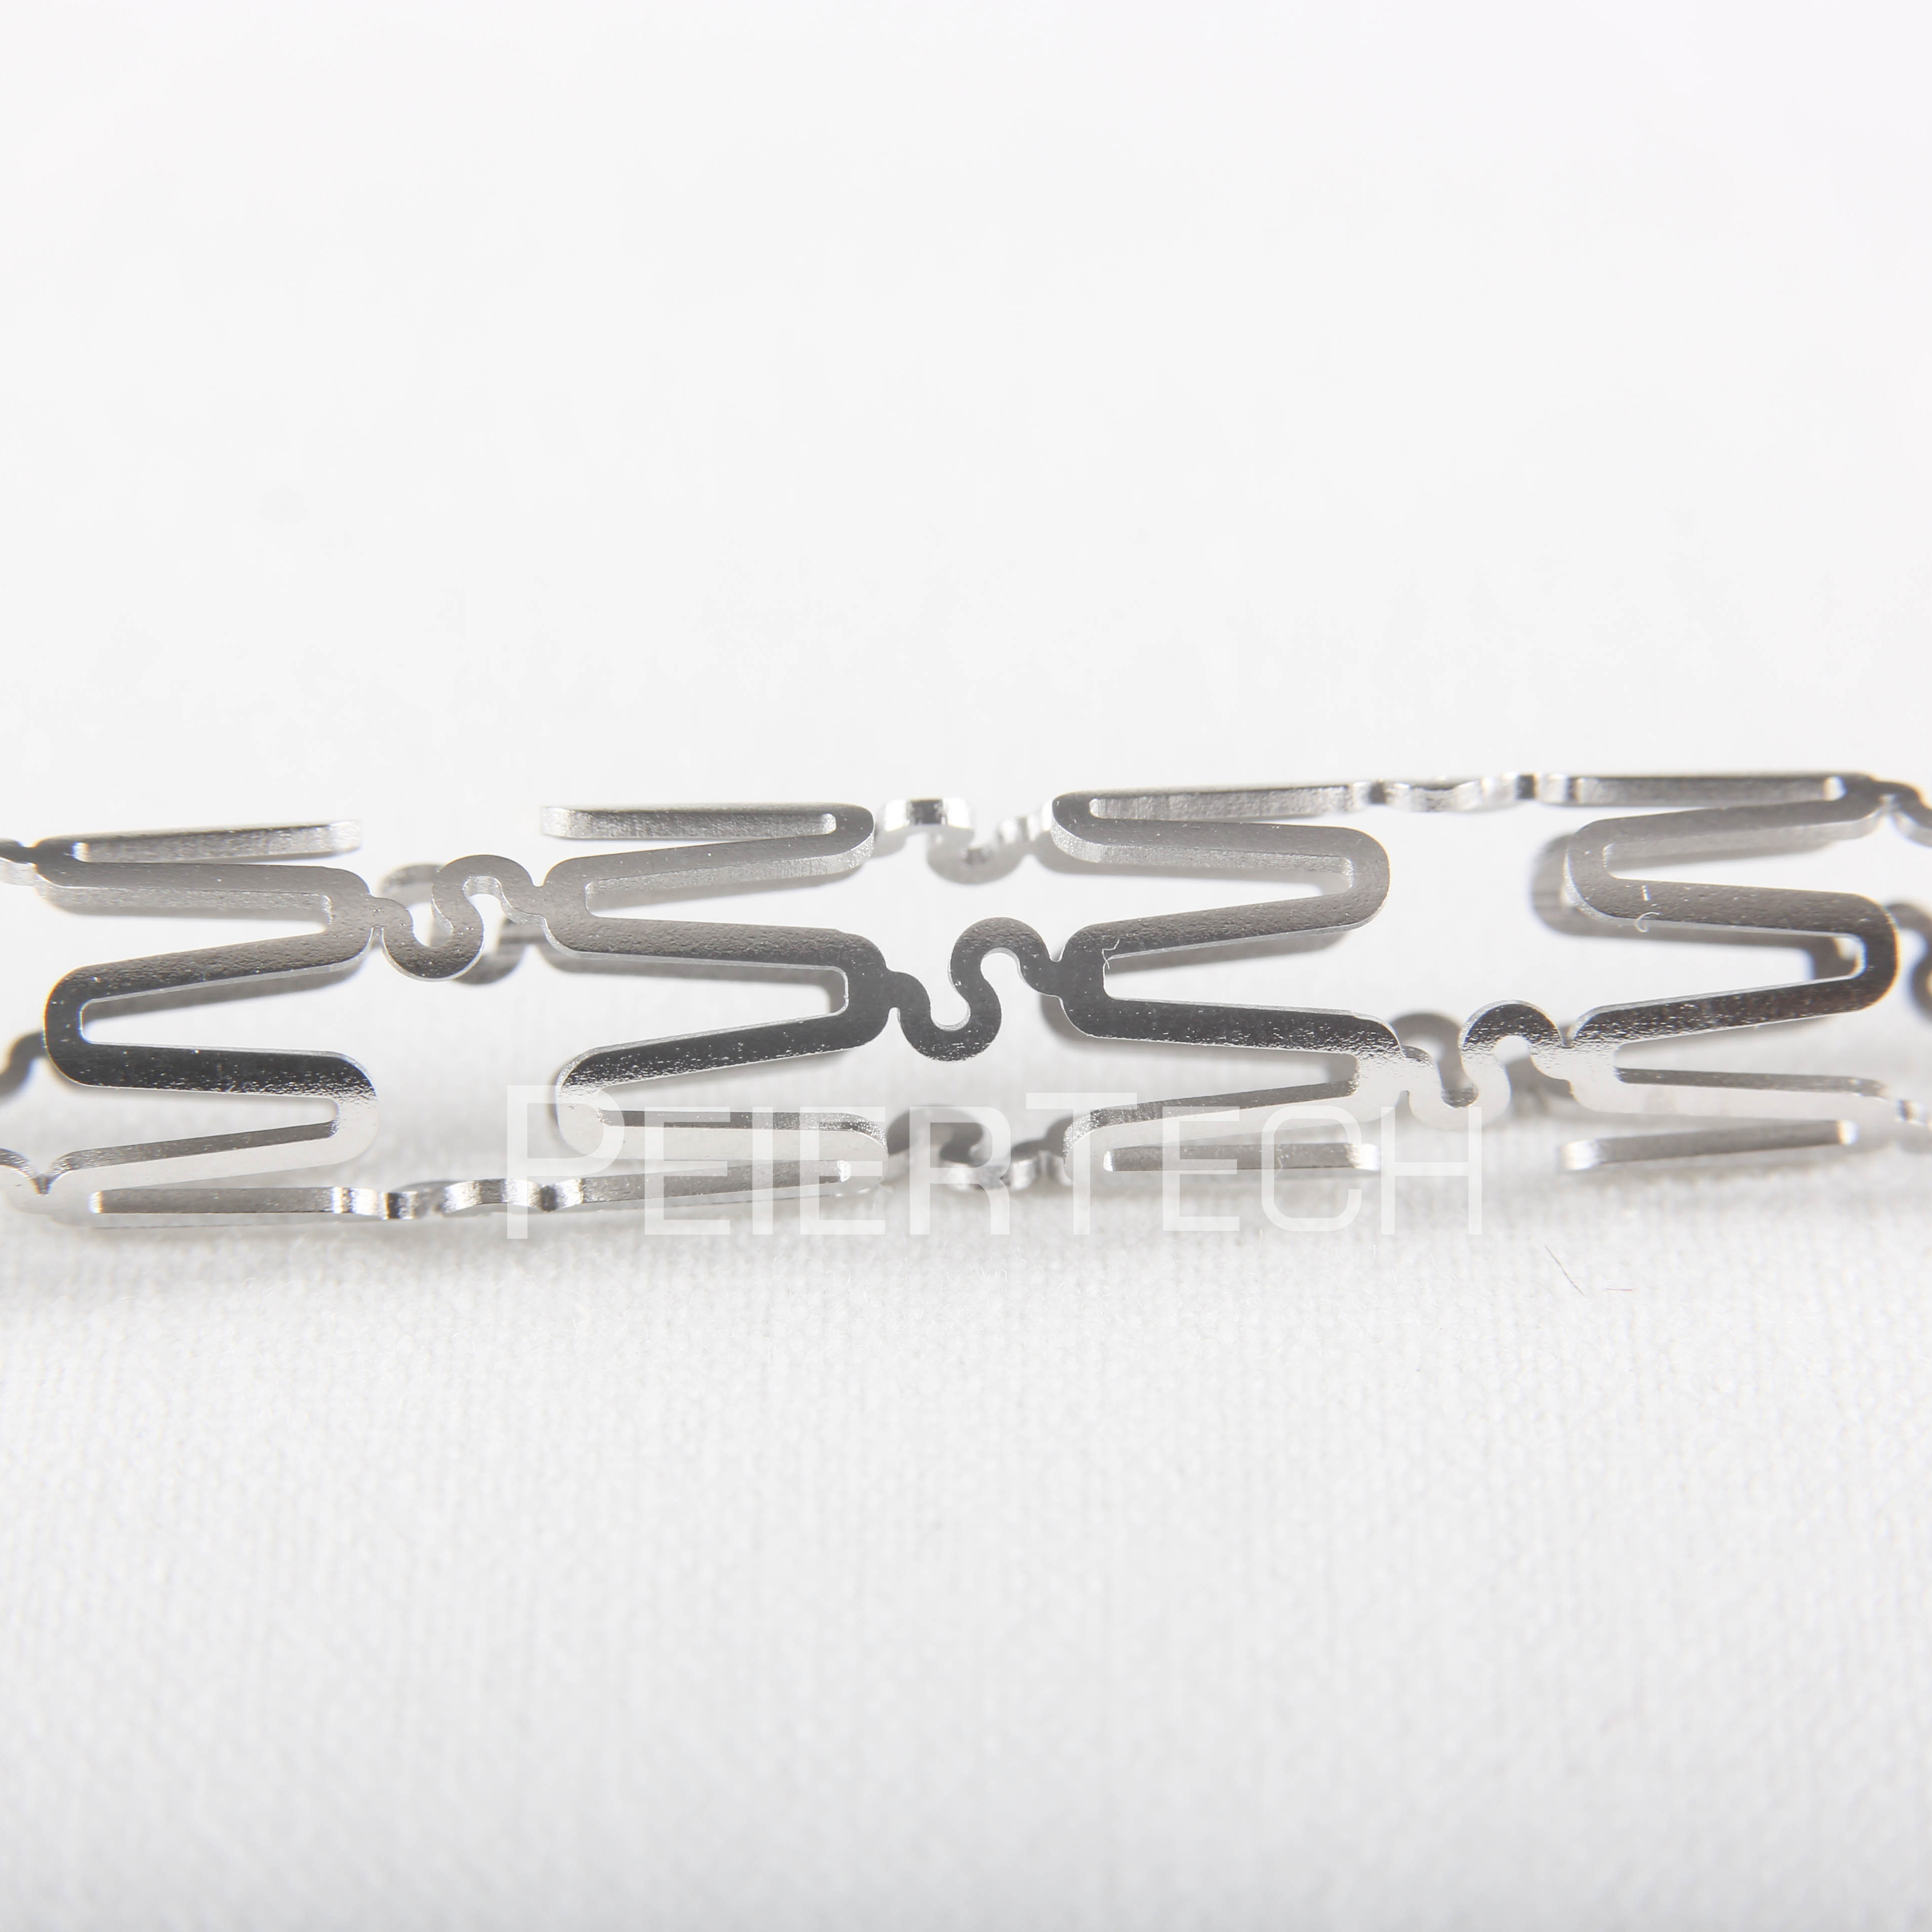  Laser Cutting TAA, AAA, Filters, Heart Valve Frames, Self-expandable Nitinol Stent